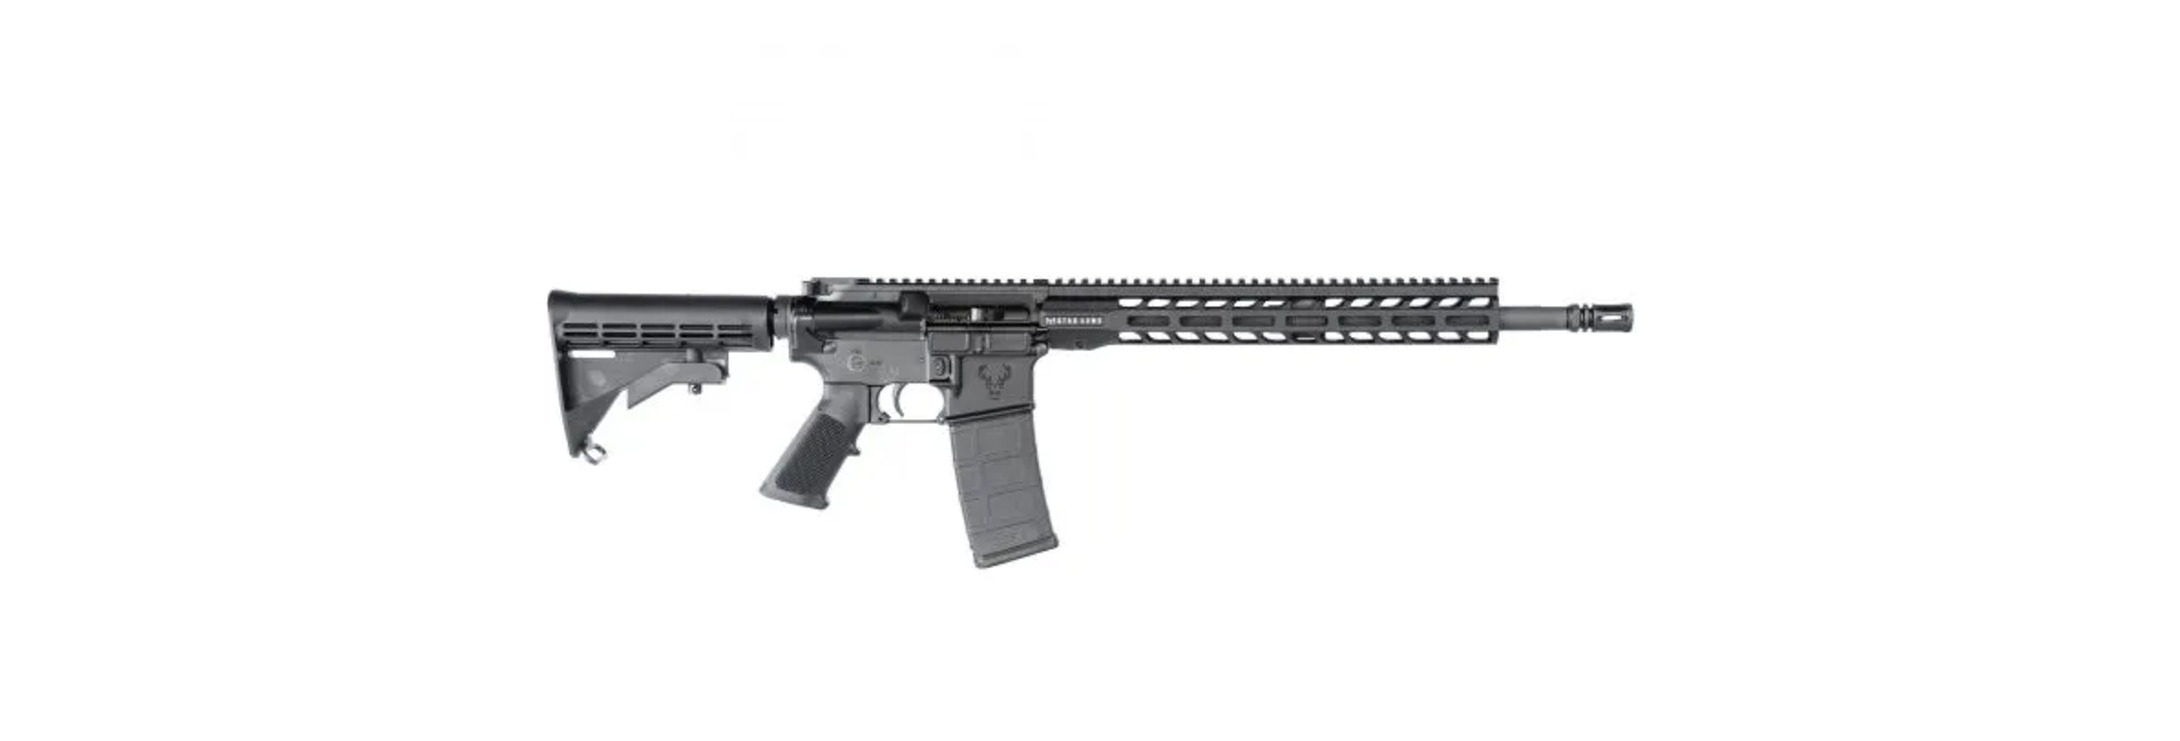 STAG ARMS STAG-15 W/ HOLOSUNRED DOT (CODE W0051471)-image